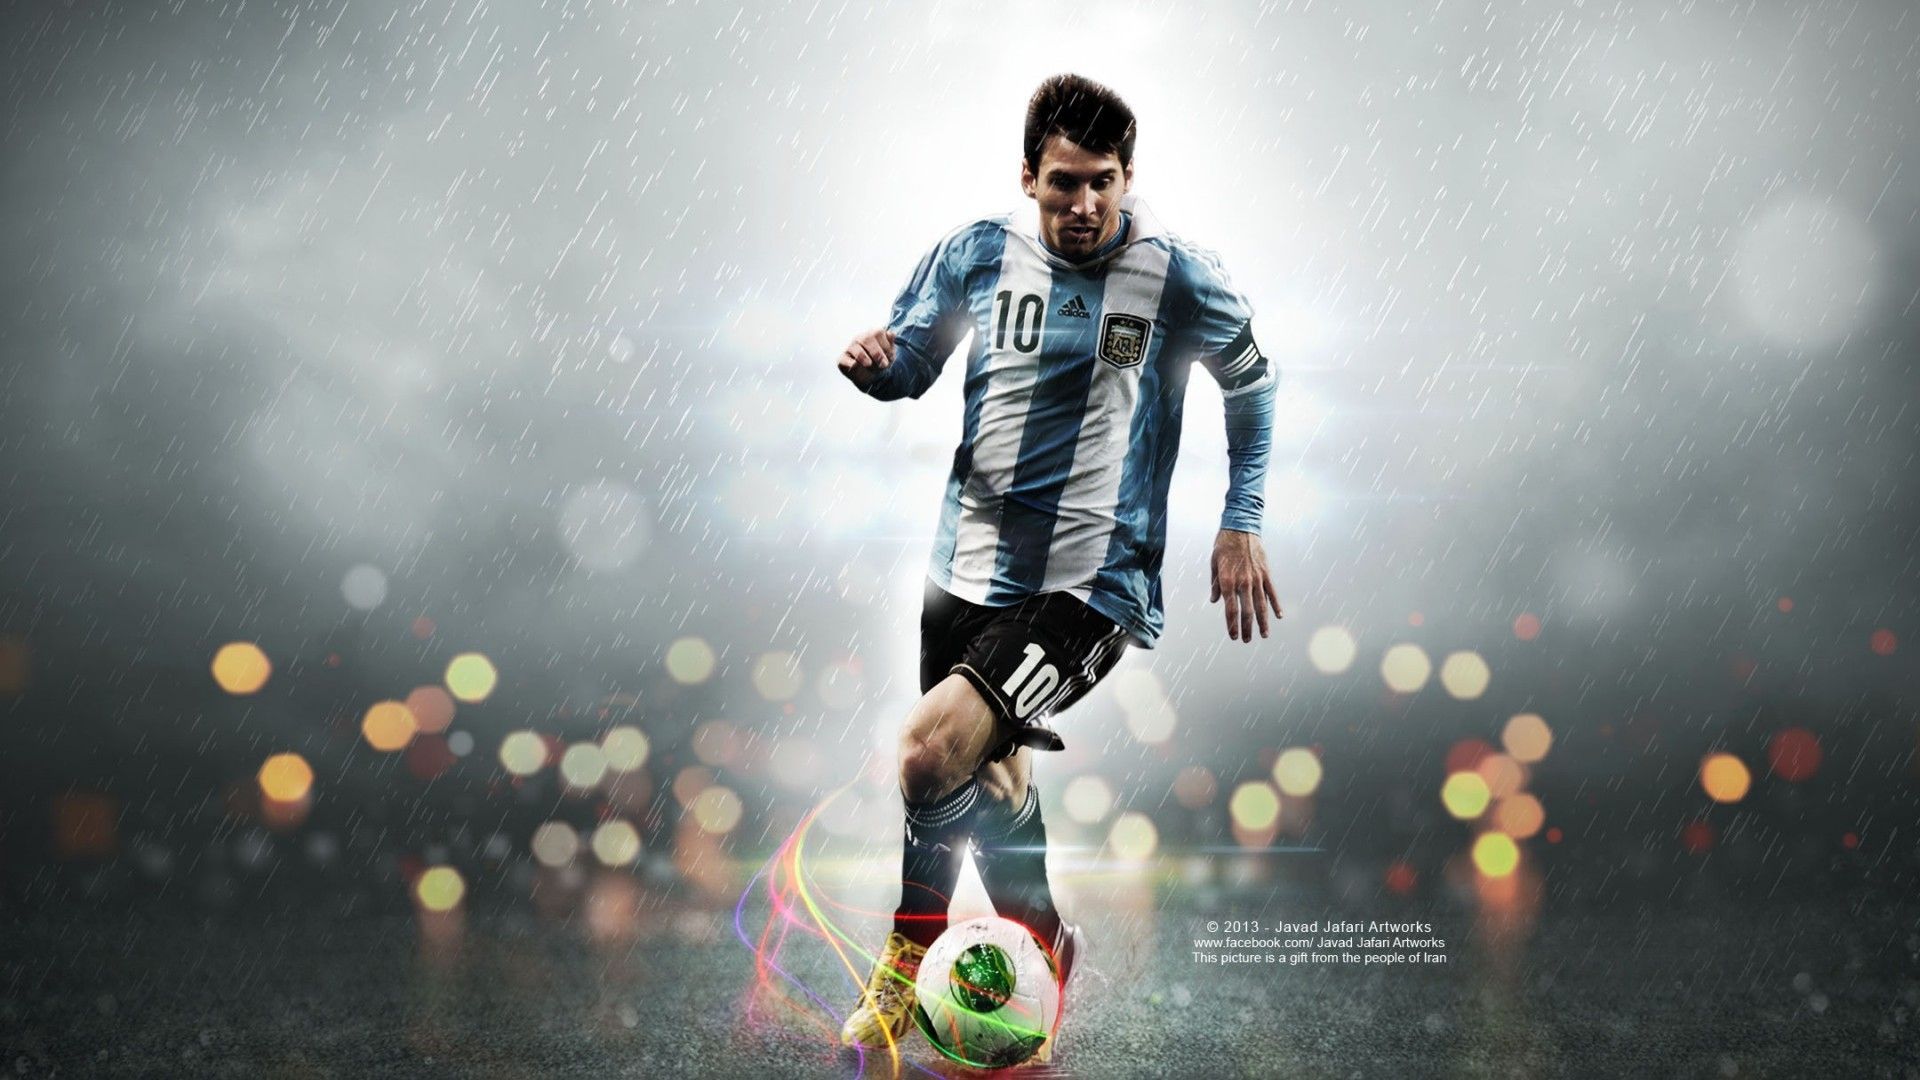 1920x1080 Awesome Football Wallpaper Picture In Hd For Download 1920 1200